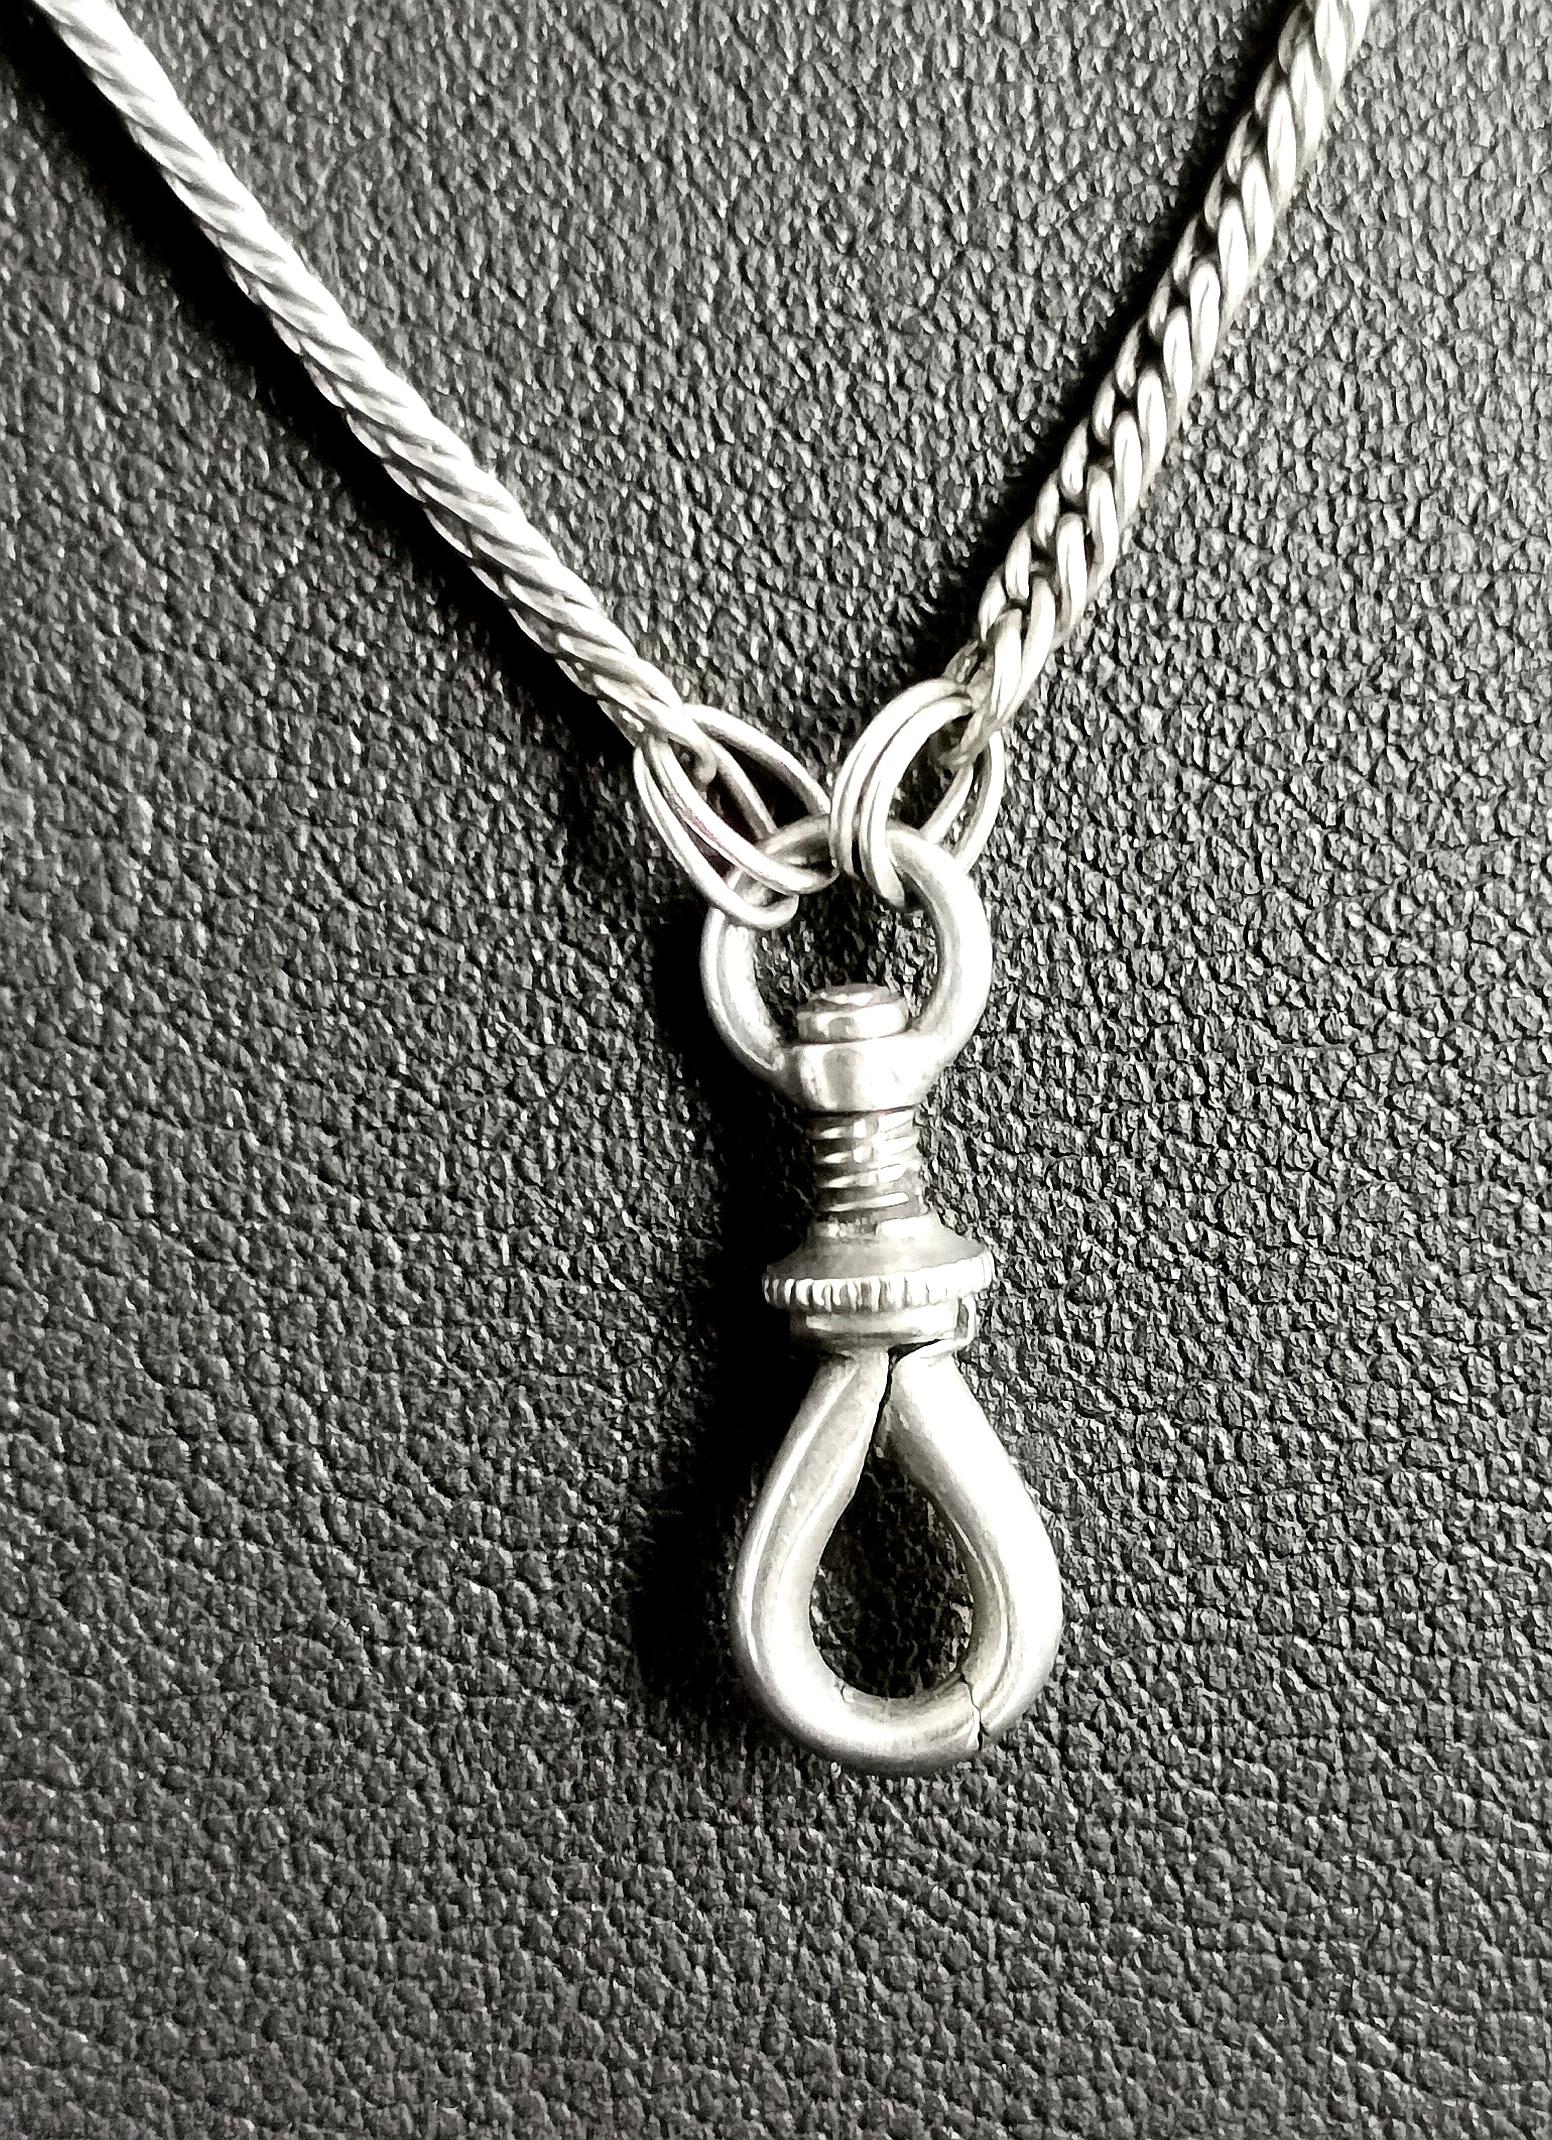 Women's or Men's Antique Sterling Silver Longuard Chain Necklace, Muff Chain, Edwardian